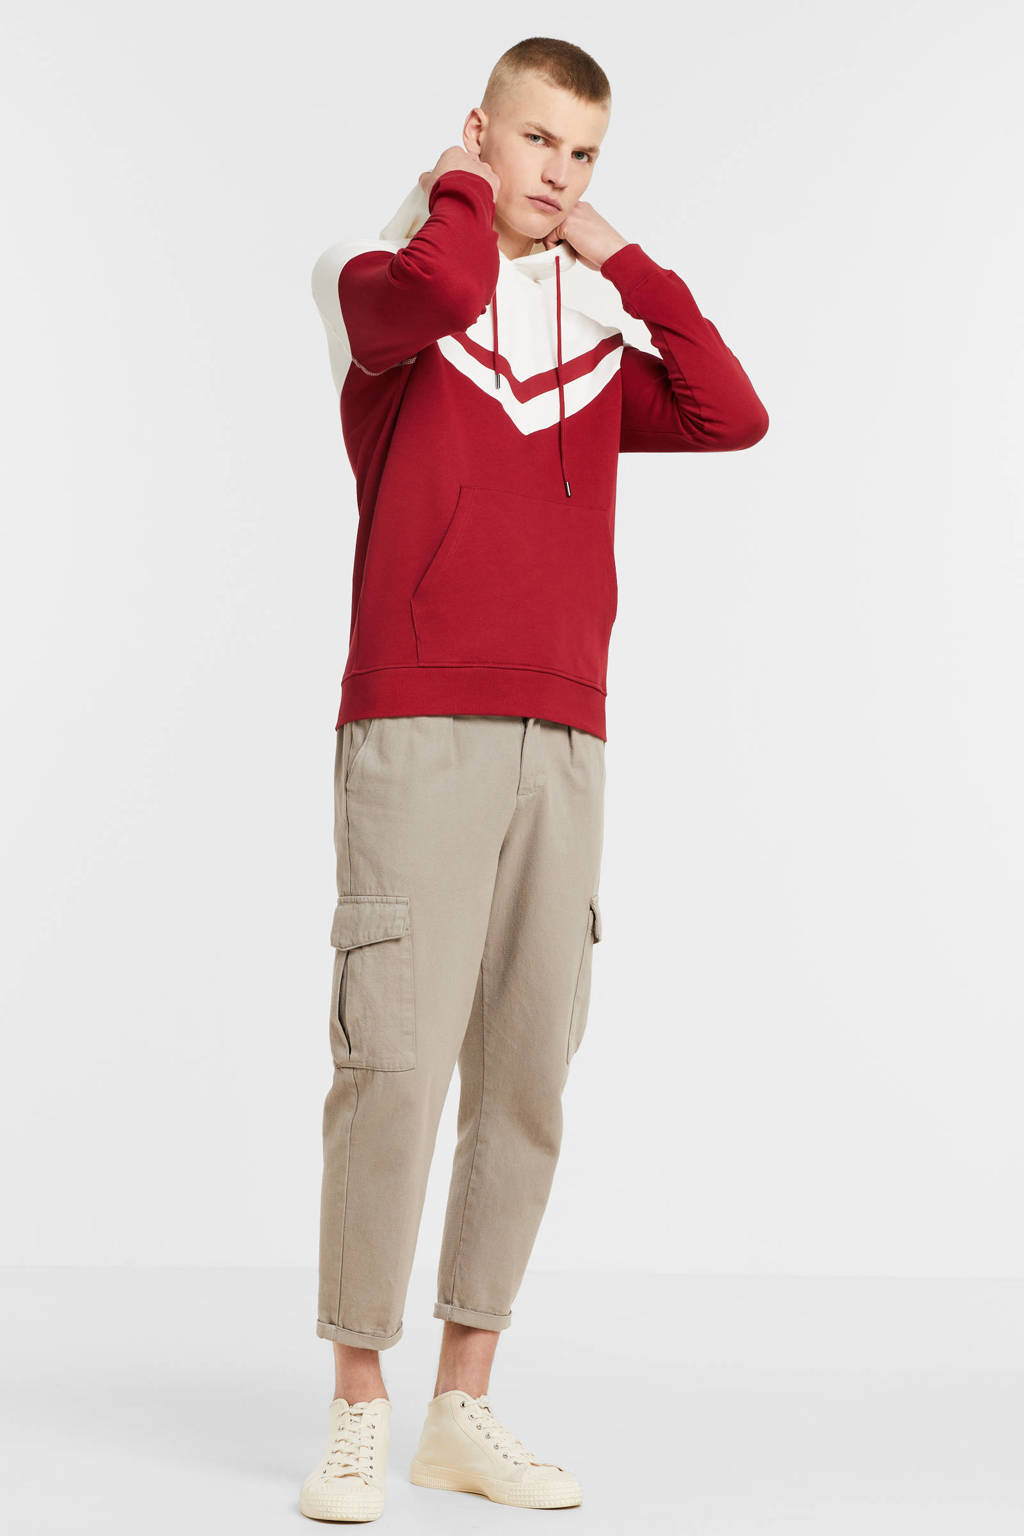 ONLY & SONS hoodie ONSVCBLOCK rio red, Rio Red